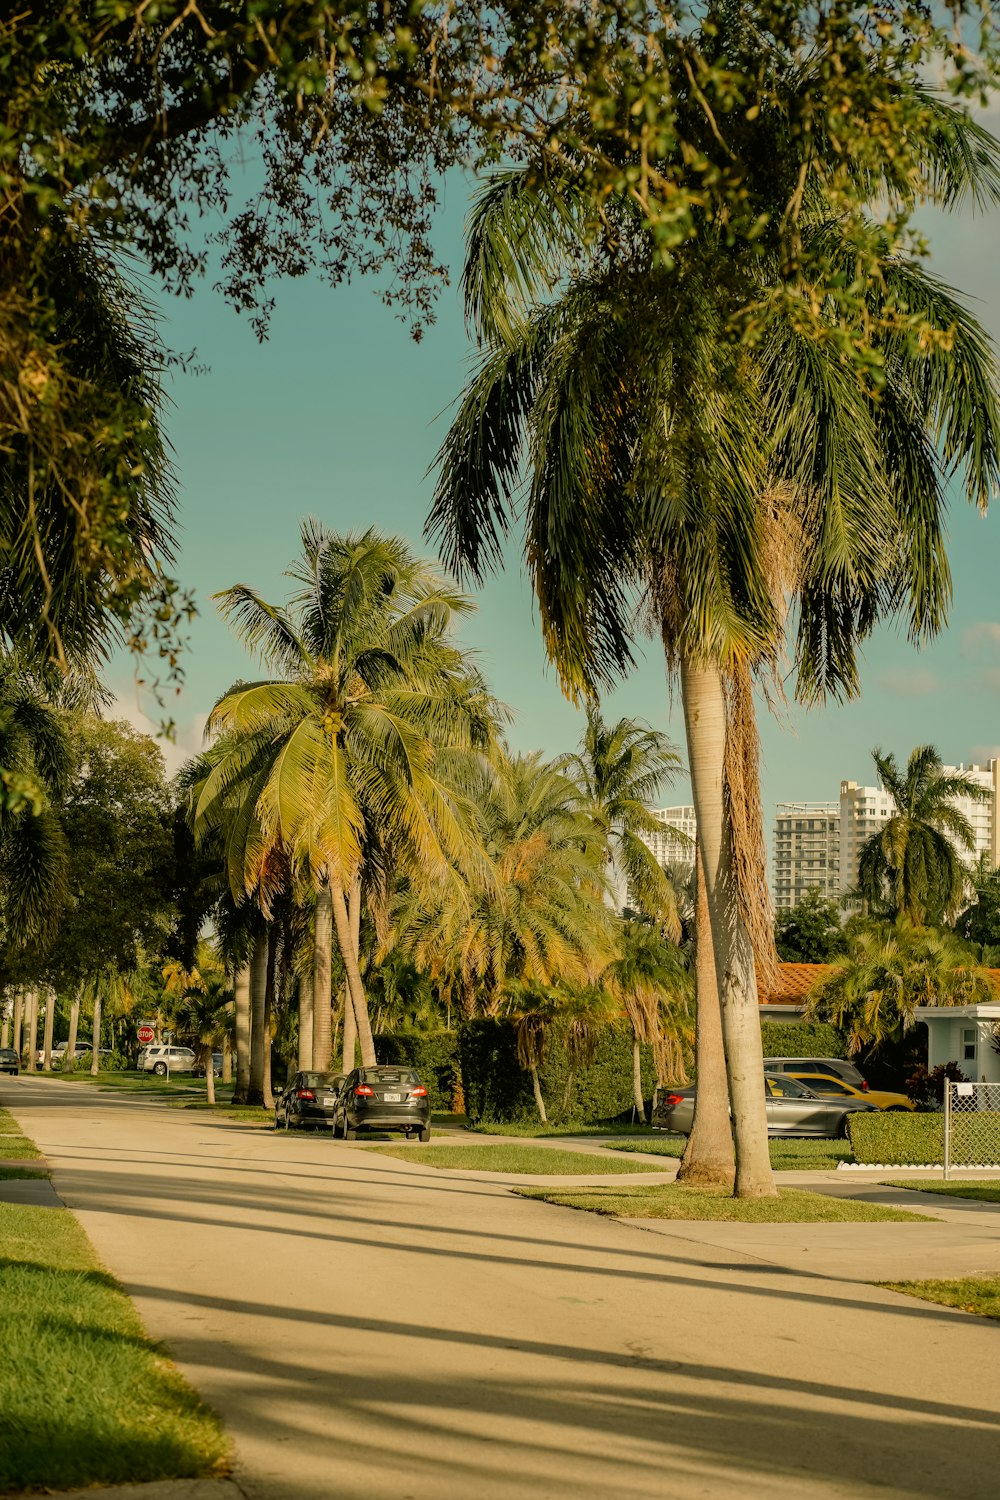 a street with palm trees and cars parked on the side of the road